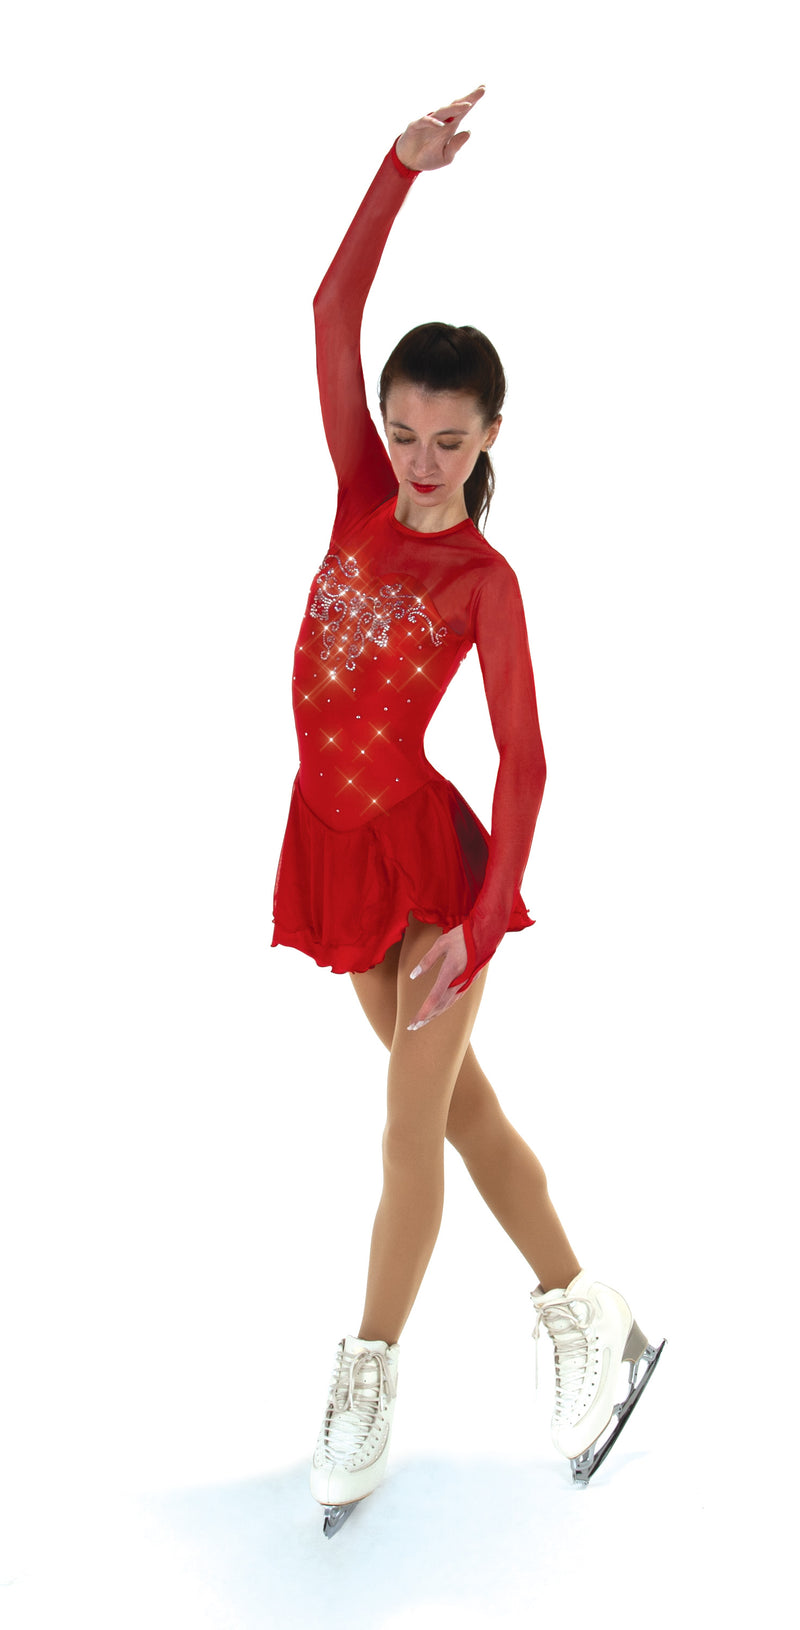 JRF22007-R Robe de patinage artistique Solitaire Sweetheart Rouge